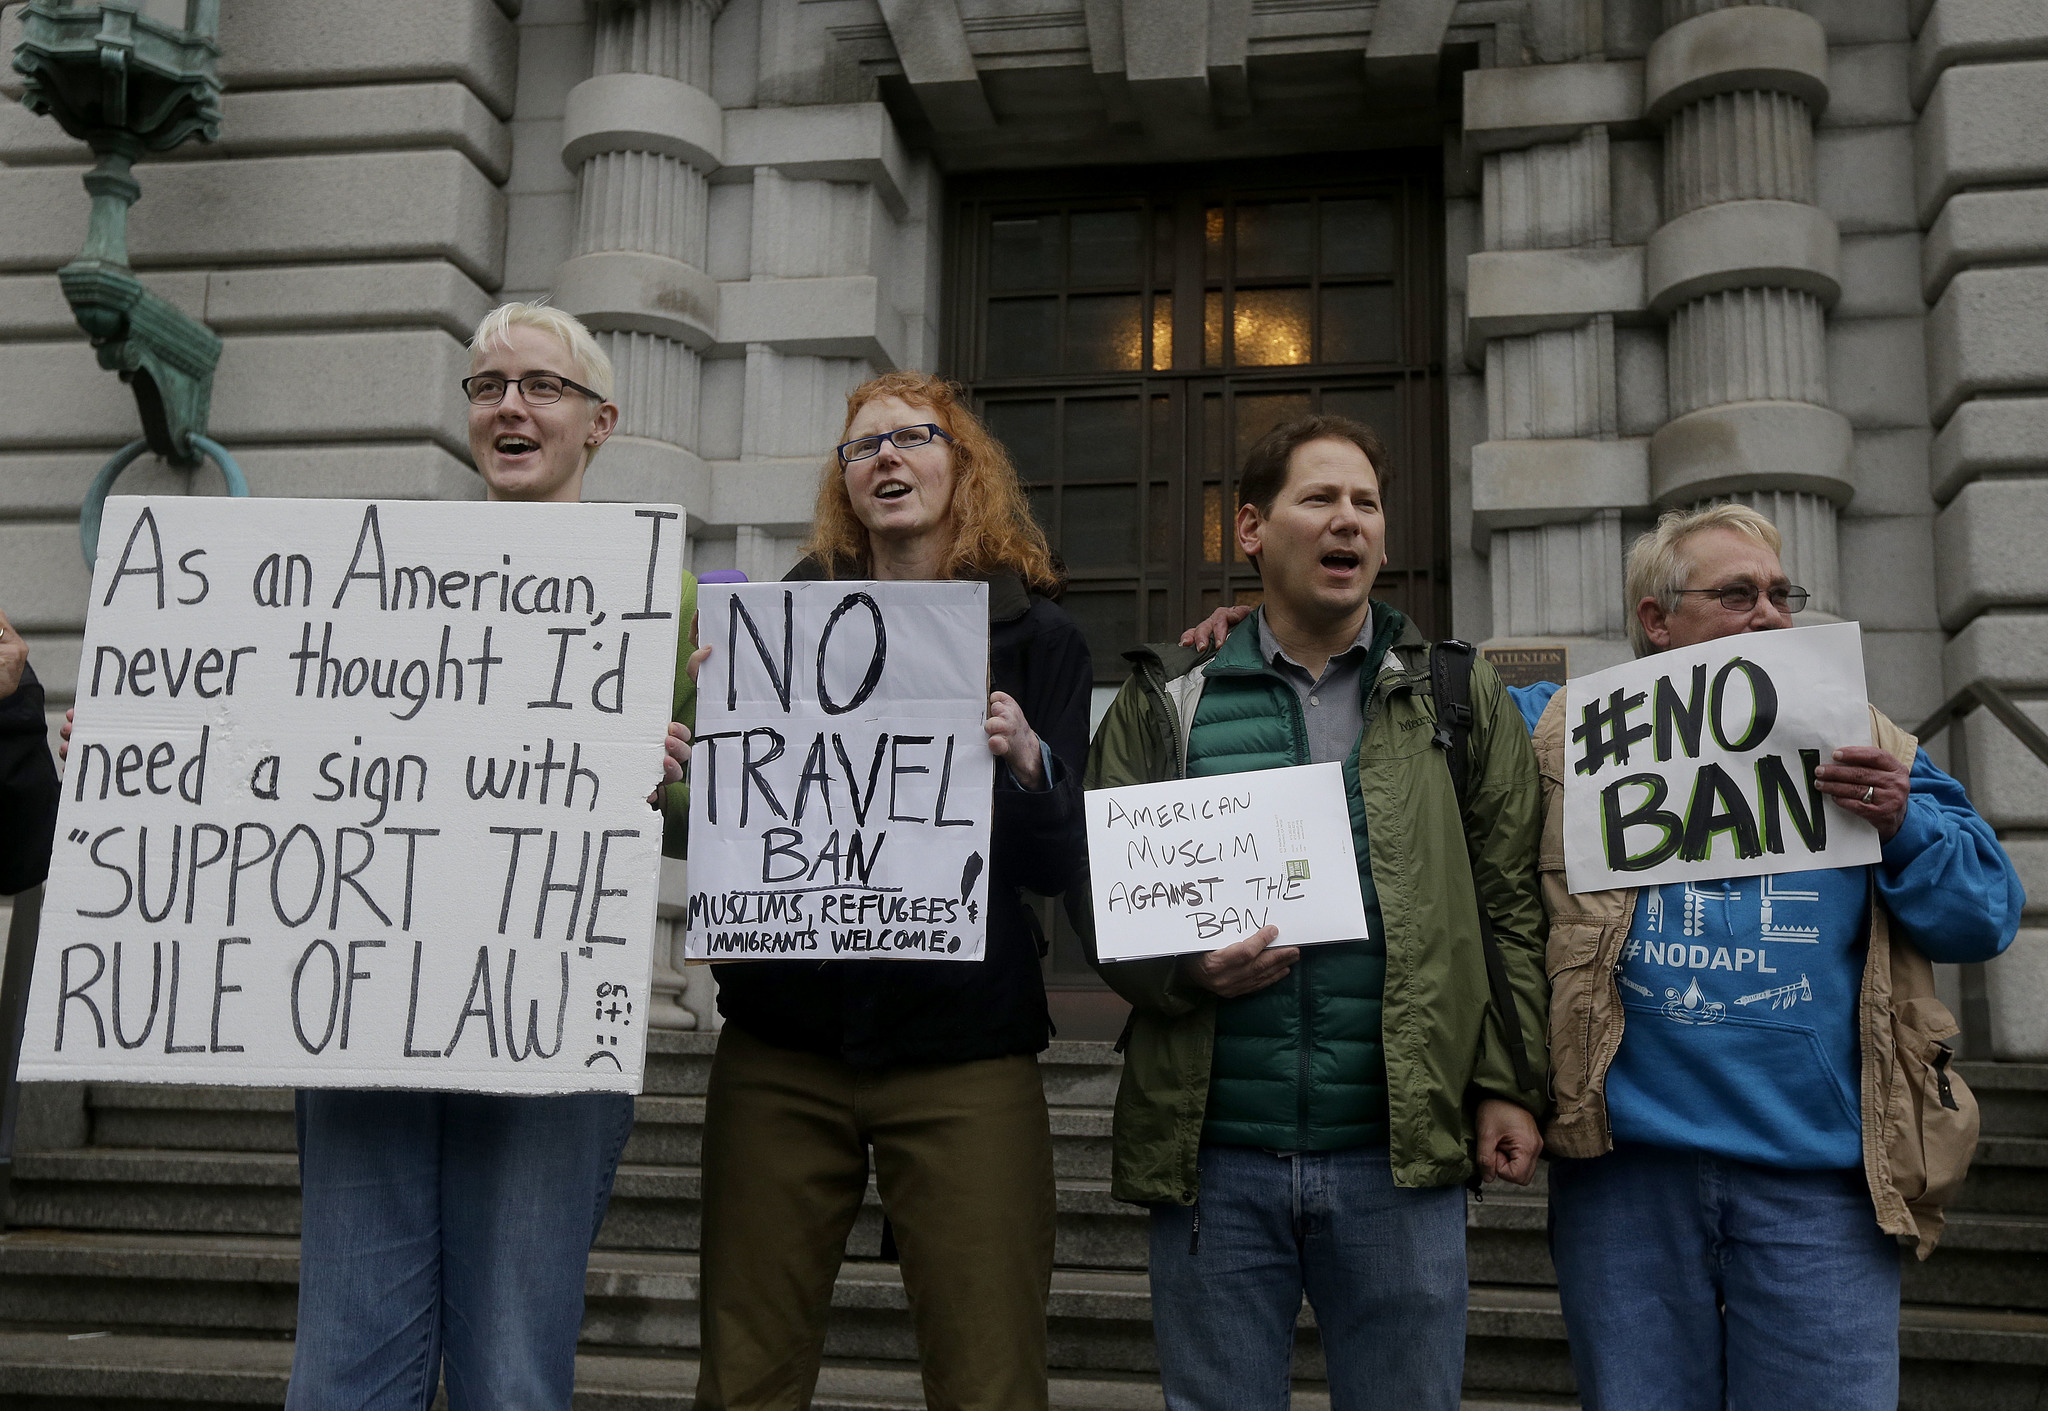 Kay Aull, from left, holds a sign and chants with Beth Kohn, Paul Paz y Mino and Karen Shore outside of the 9th U.S. Circuit Court of Appeals in San Francisco, Tuesday, Feb. 7, 2017. President Donald Trump’s travel ban faced its biggest legal test yet Tuesday as a panel of federal judges prepared to hear arguments from the administration and its opponents about two fundamentally divergent views of the executive branch and the court system. (AP Photo/Jeff Chiu)